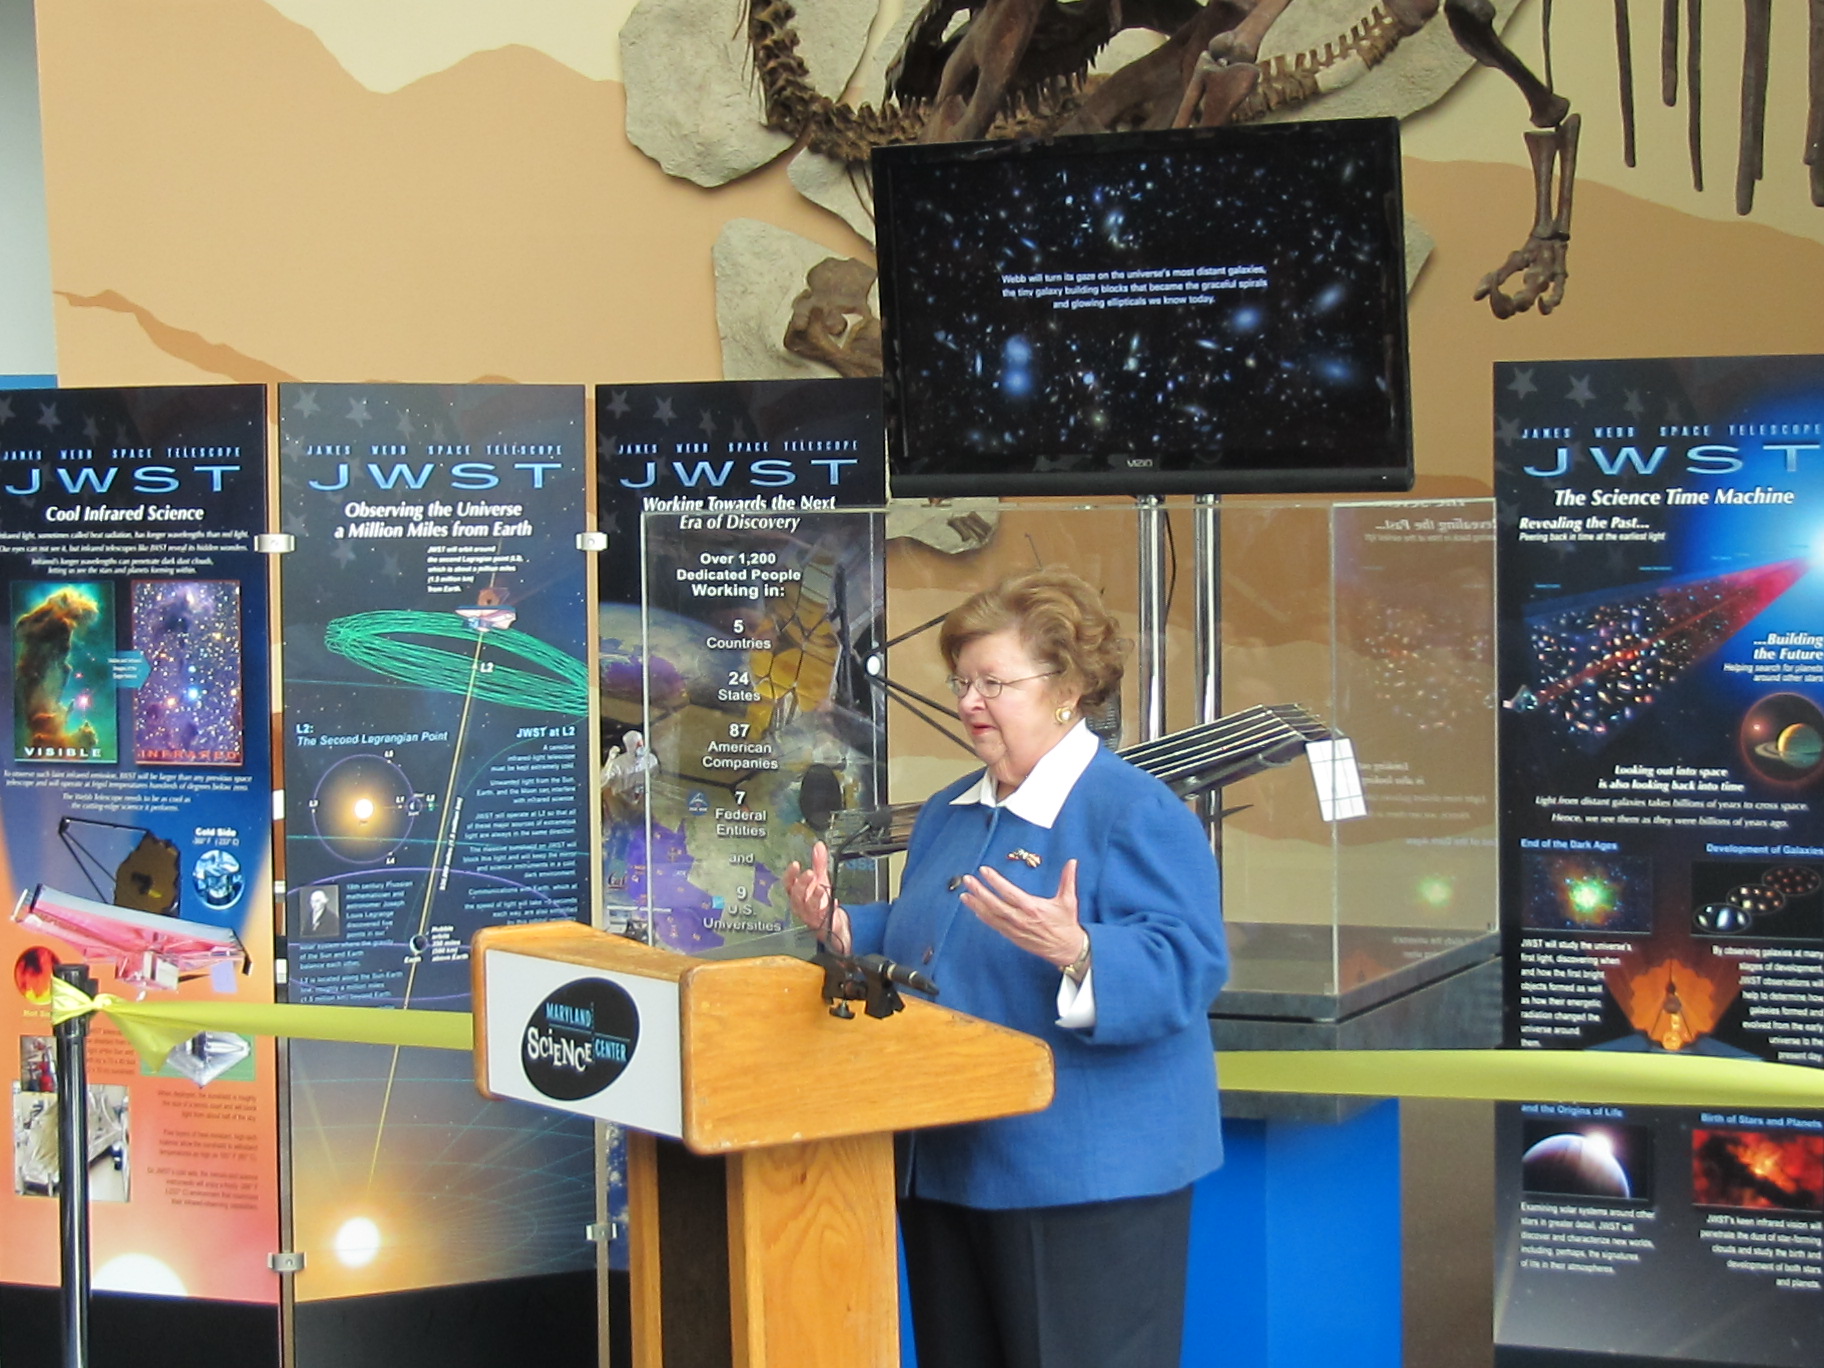 Speaking at the Maryland Science Center to unveil a permanent exhibit on the James Webb Space Telescope.